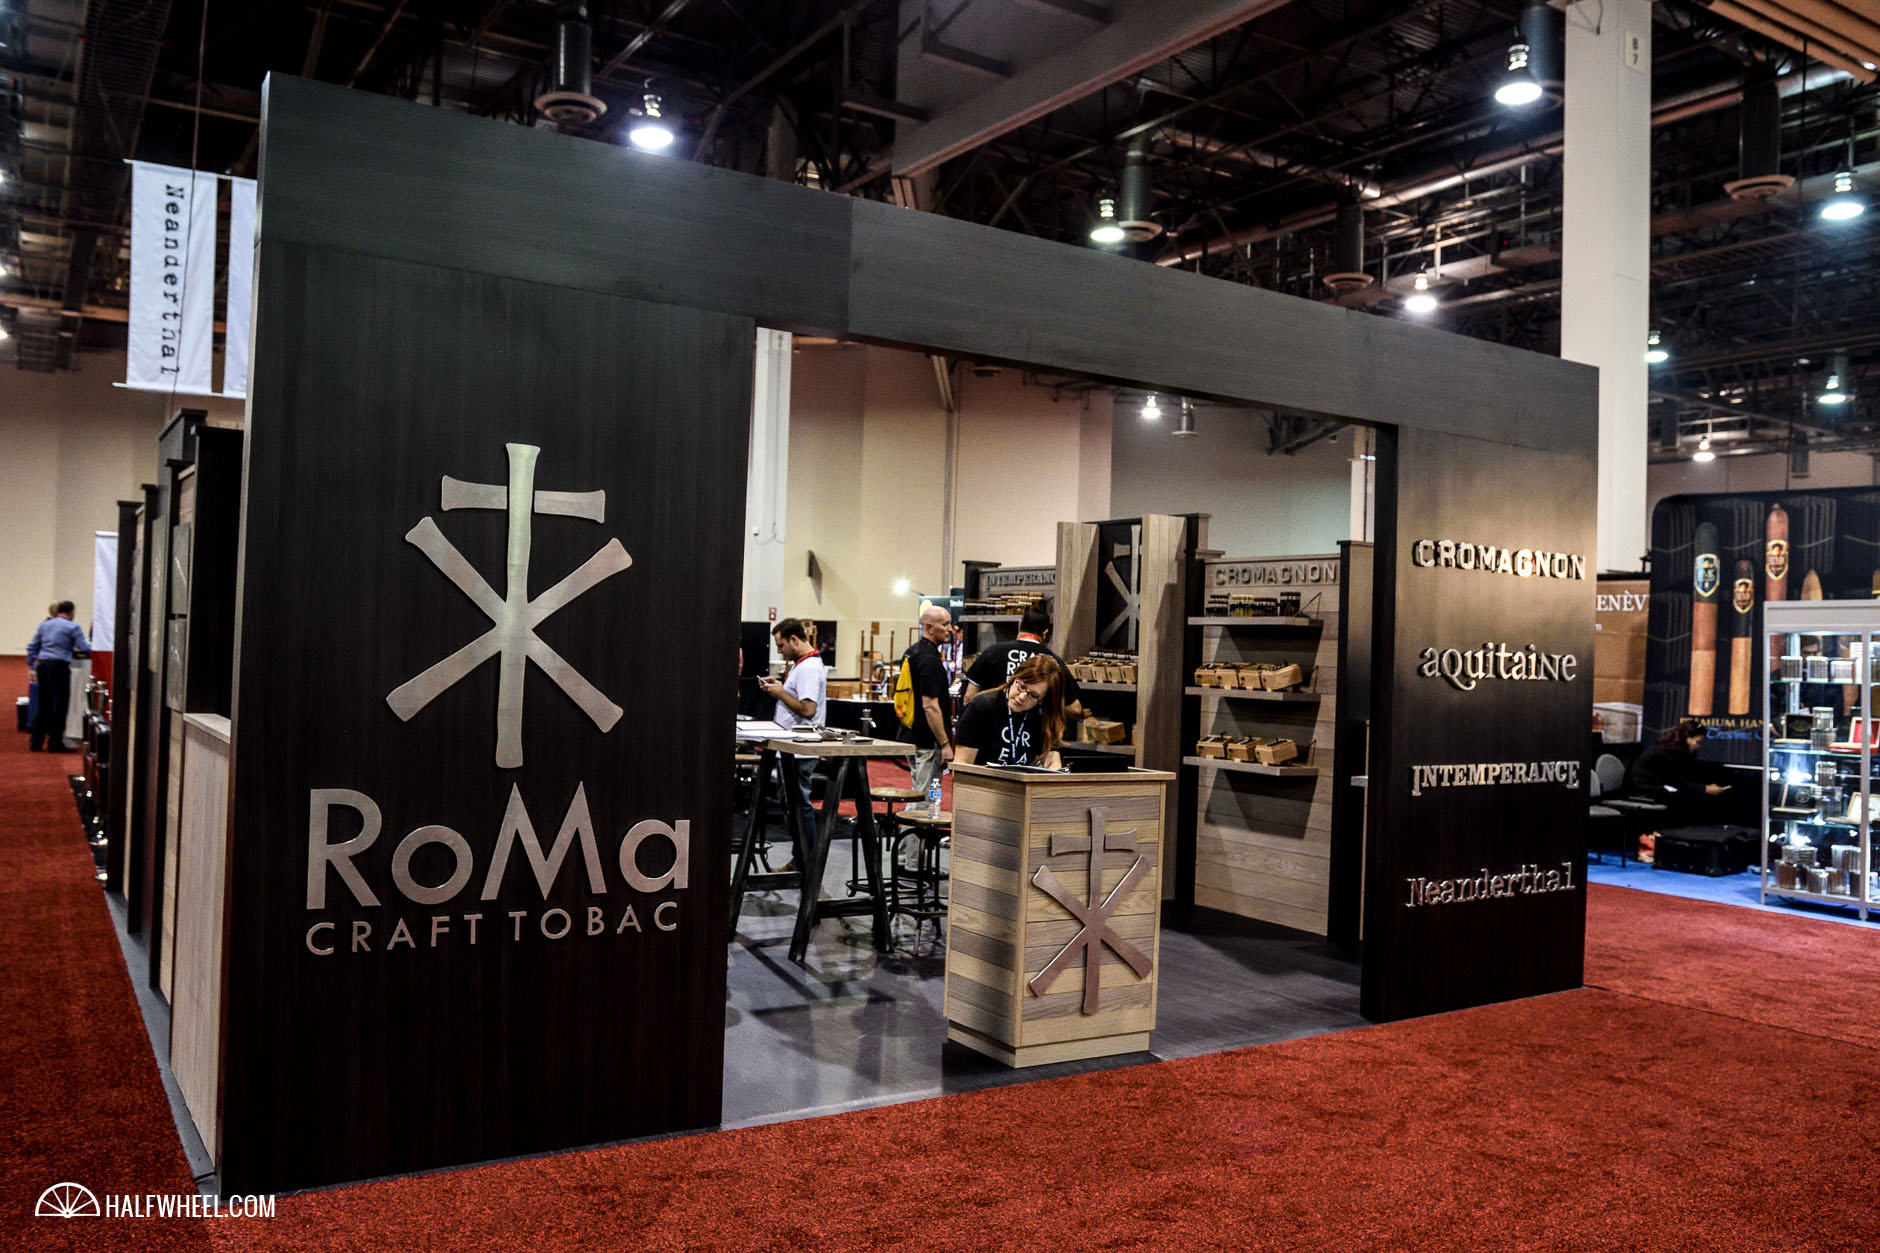 RoMa Craft Tobac booth 1 IPCPR 2016